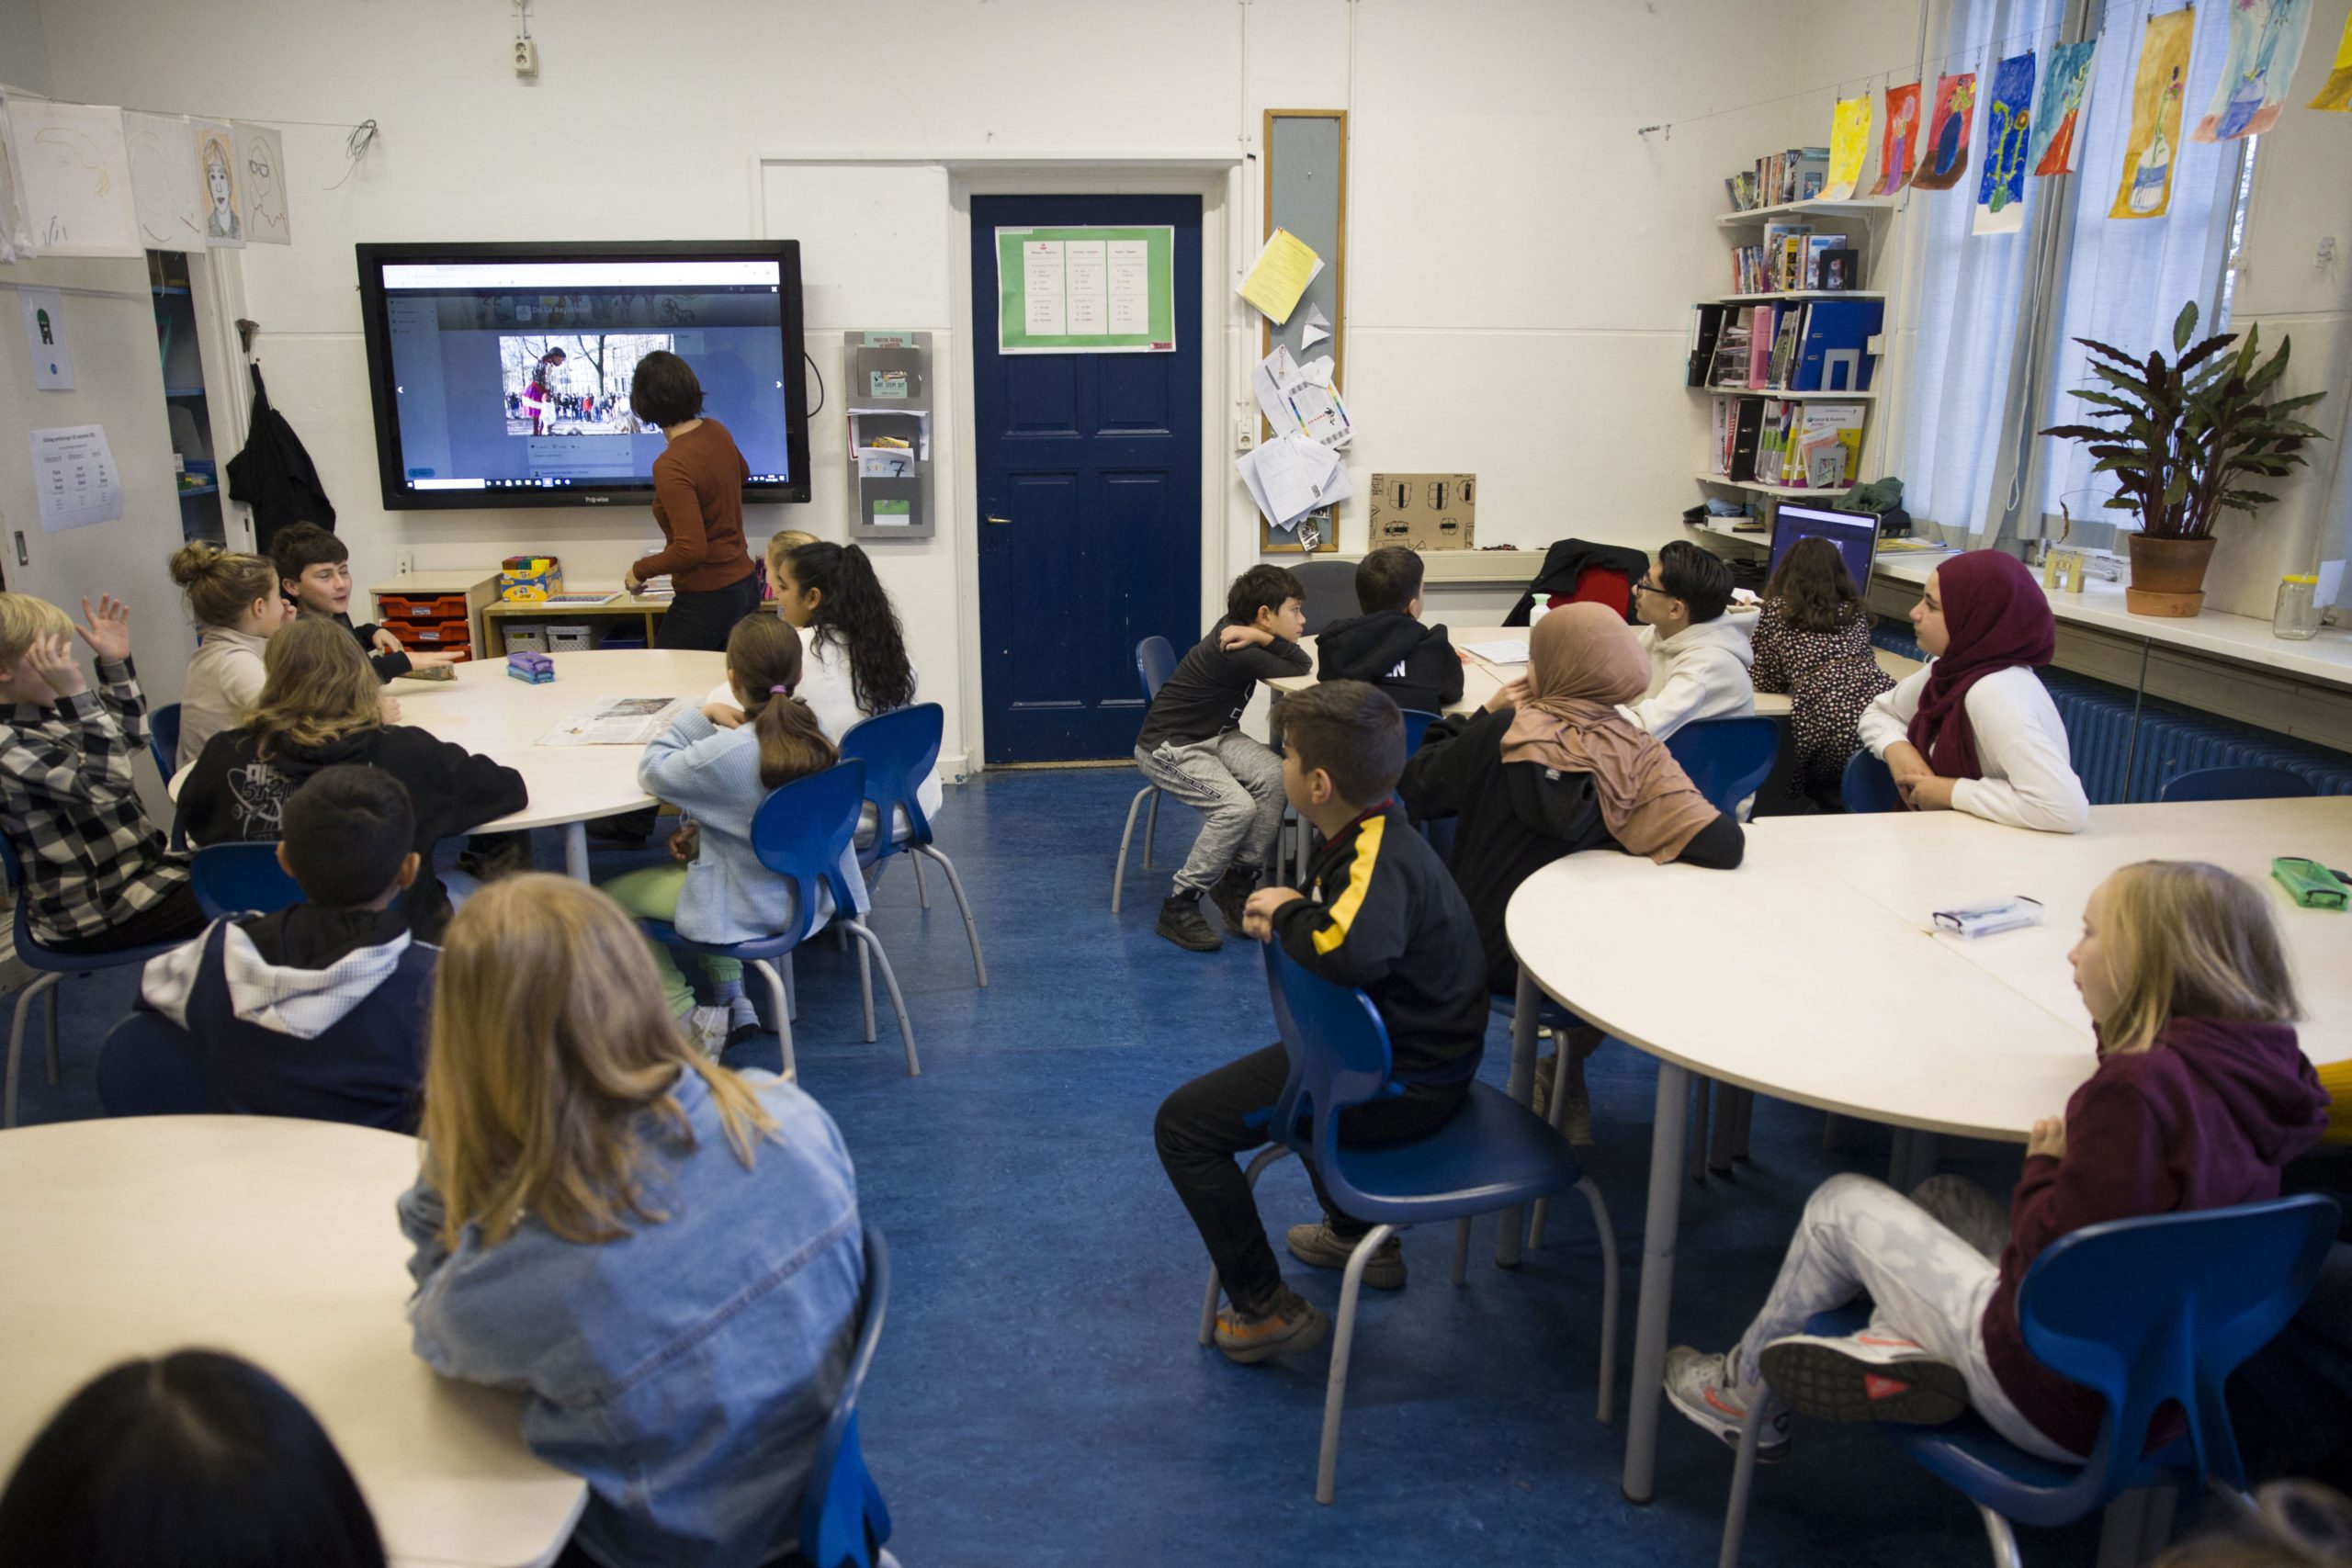 Pupils listen to their teacher in a classroom at the De La Reyschool, as the number of corona infections is rising, especially among children, in The Hague on November 19, 2021. - Dutch Prime Minister Mark Rutte announced one week ago Western Europe's first partial lockdown of the winter, with at least three weeks of Covid curbs on restaurants, shops and sporting events. - Netherlands OUT (Photo by Arie KIEVIT / ANP / AFP) / Netherlands OUT (Photo by ARIE KIEVIT/ANP/AFP via Getty Images)